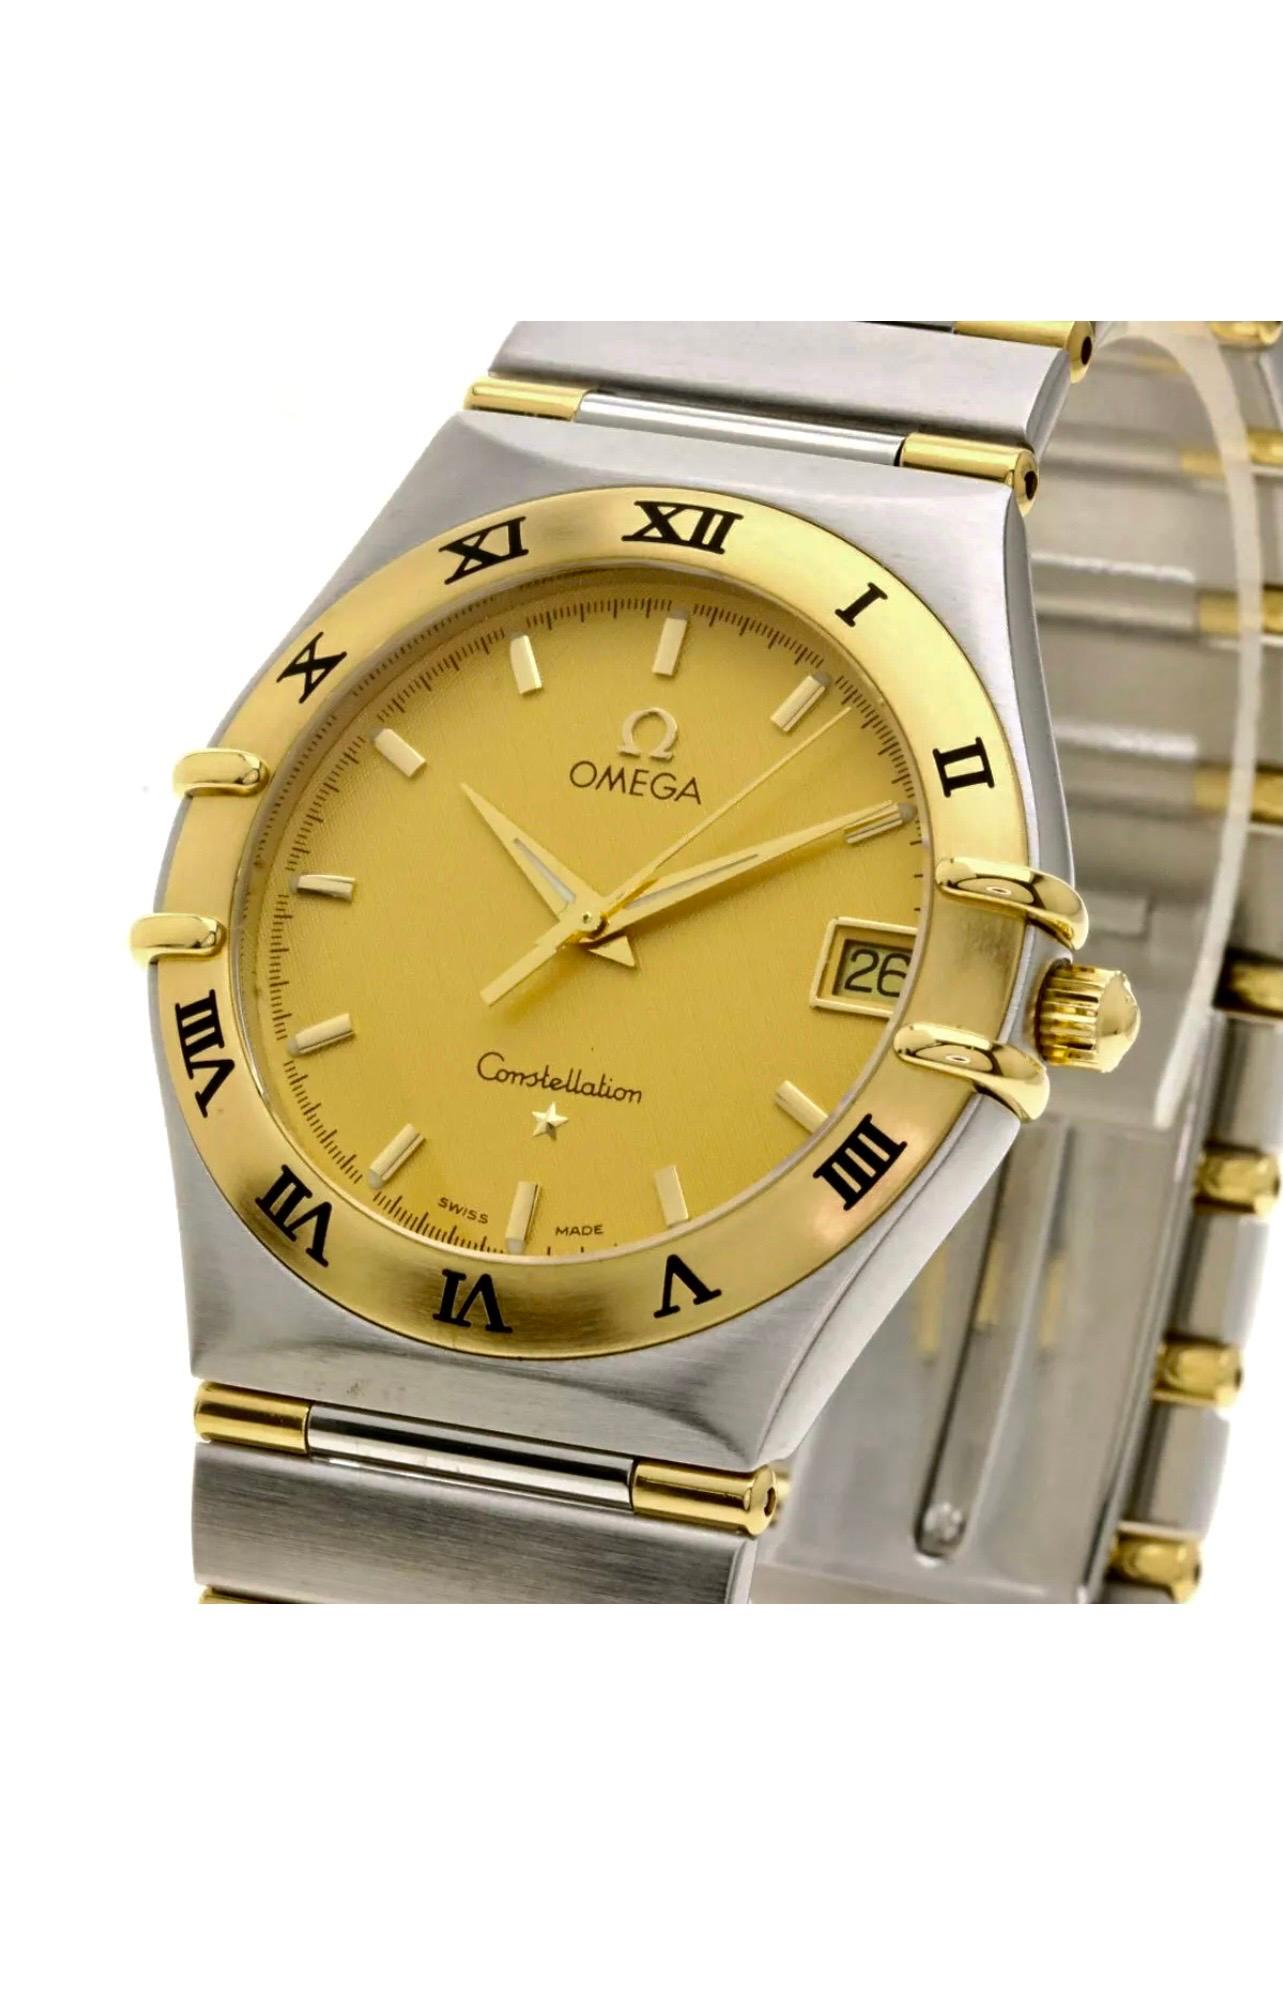 Omega Constellation Combination 1212.10 Watches Quartz Gold Dial Stainless
Omega constellation
Stainless steel and gold. Half  bar gold.
Quartz
34mm Head
Gold Dial
Two tone.
No box no papers

First appearing in 1952, the Constellation was designed